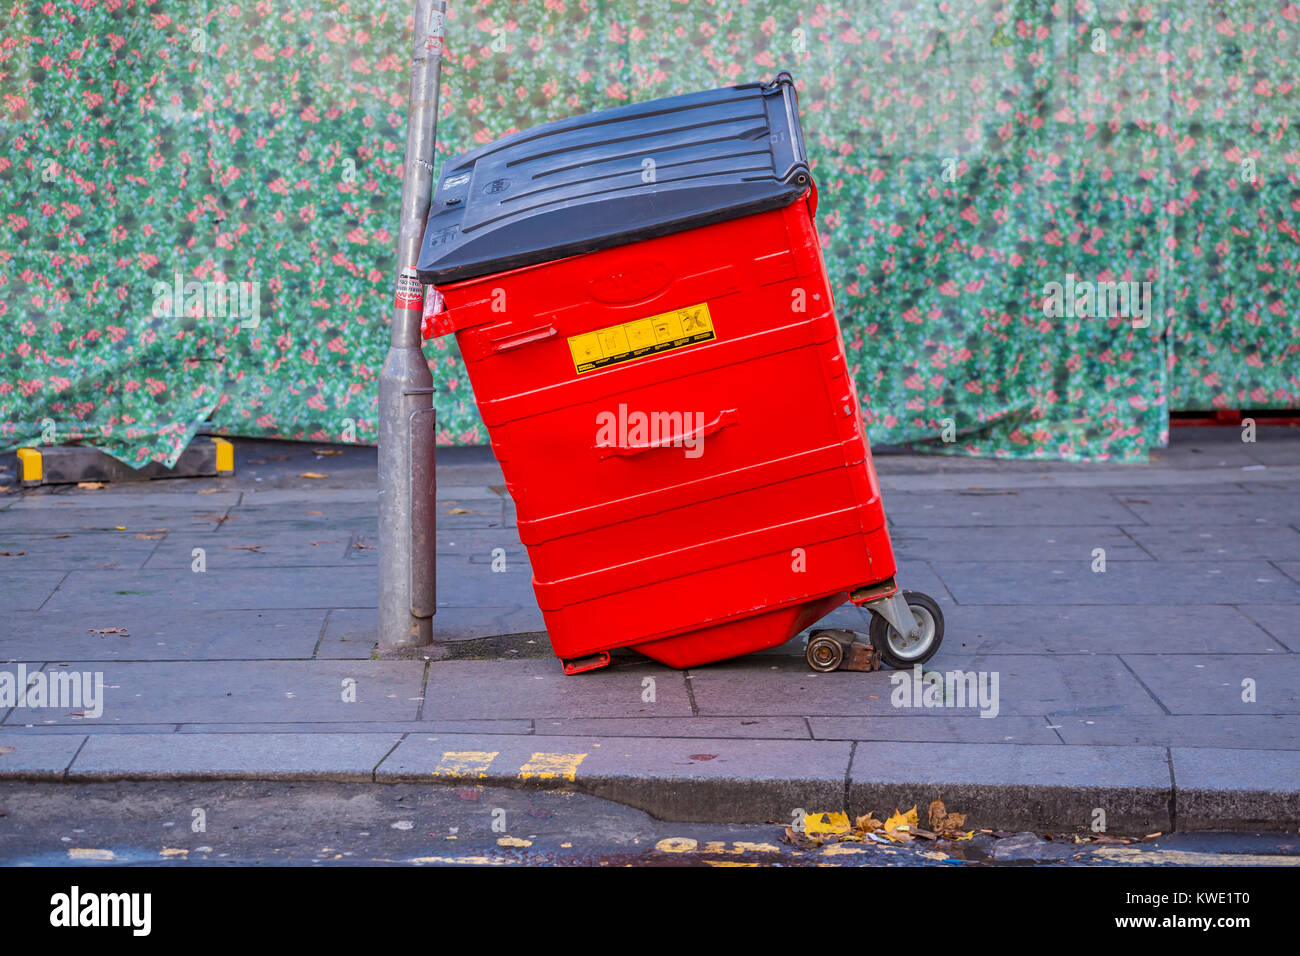 Broken rubbish bin supported by a wonky street light on a city street, UK Stock Photo